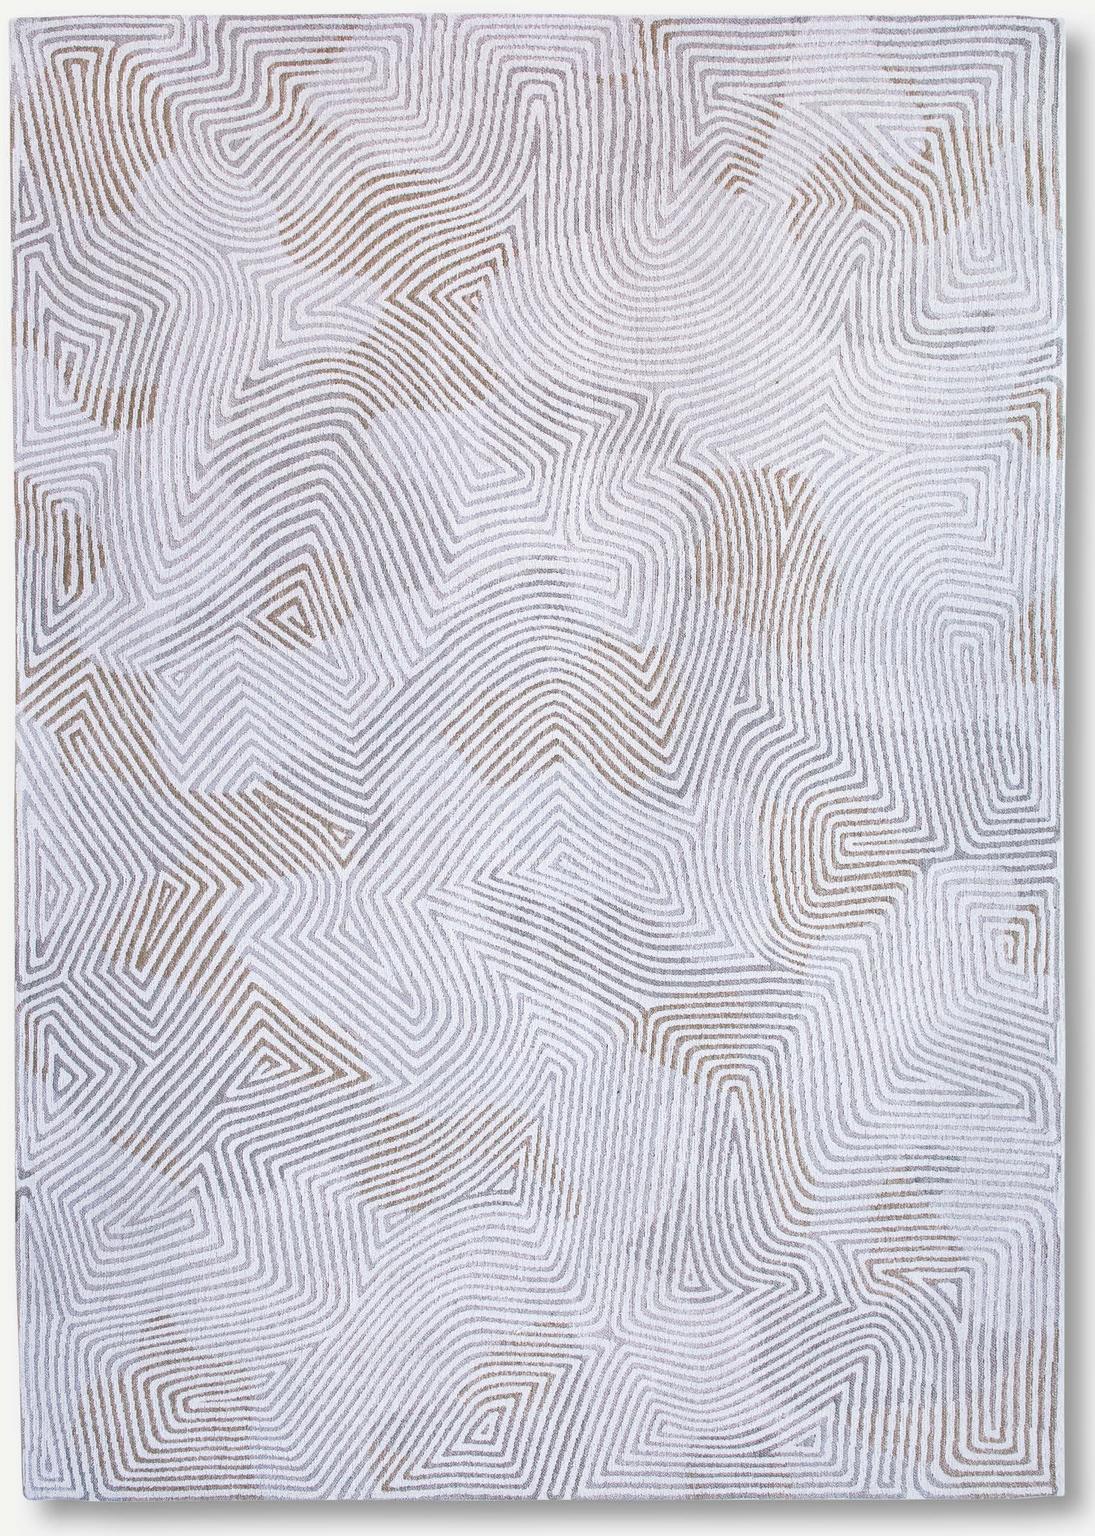 White Flatwoven Rug ☞ Size: 5' 7" x 8' (170 x 240 cm)